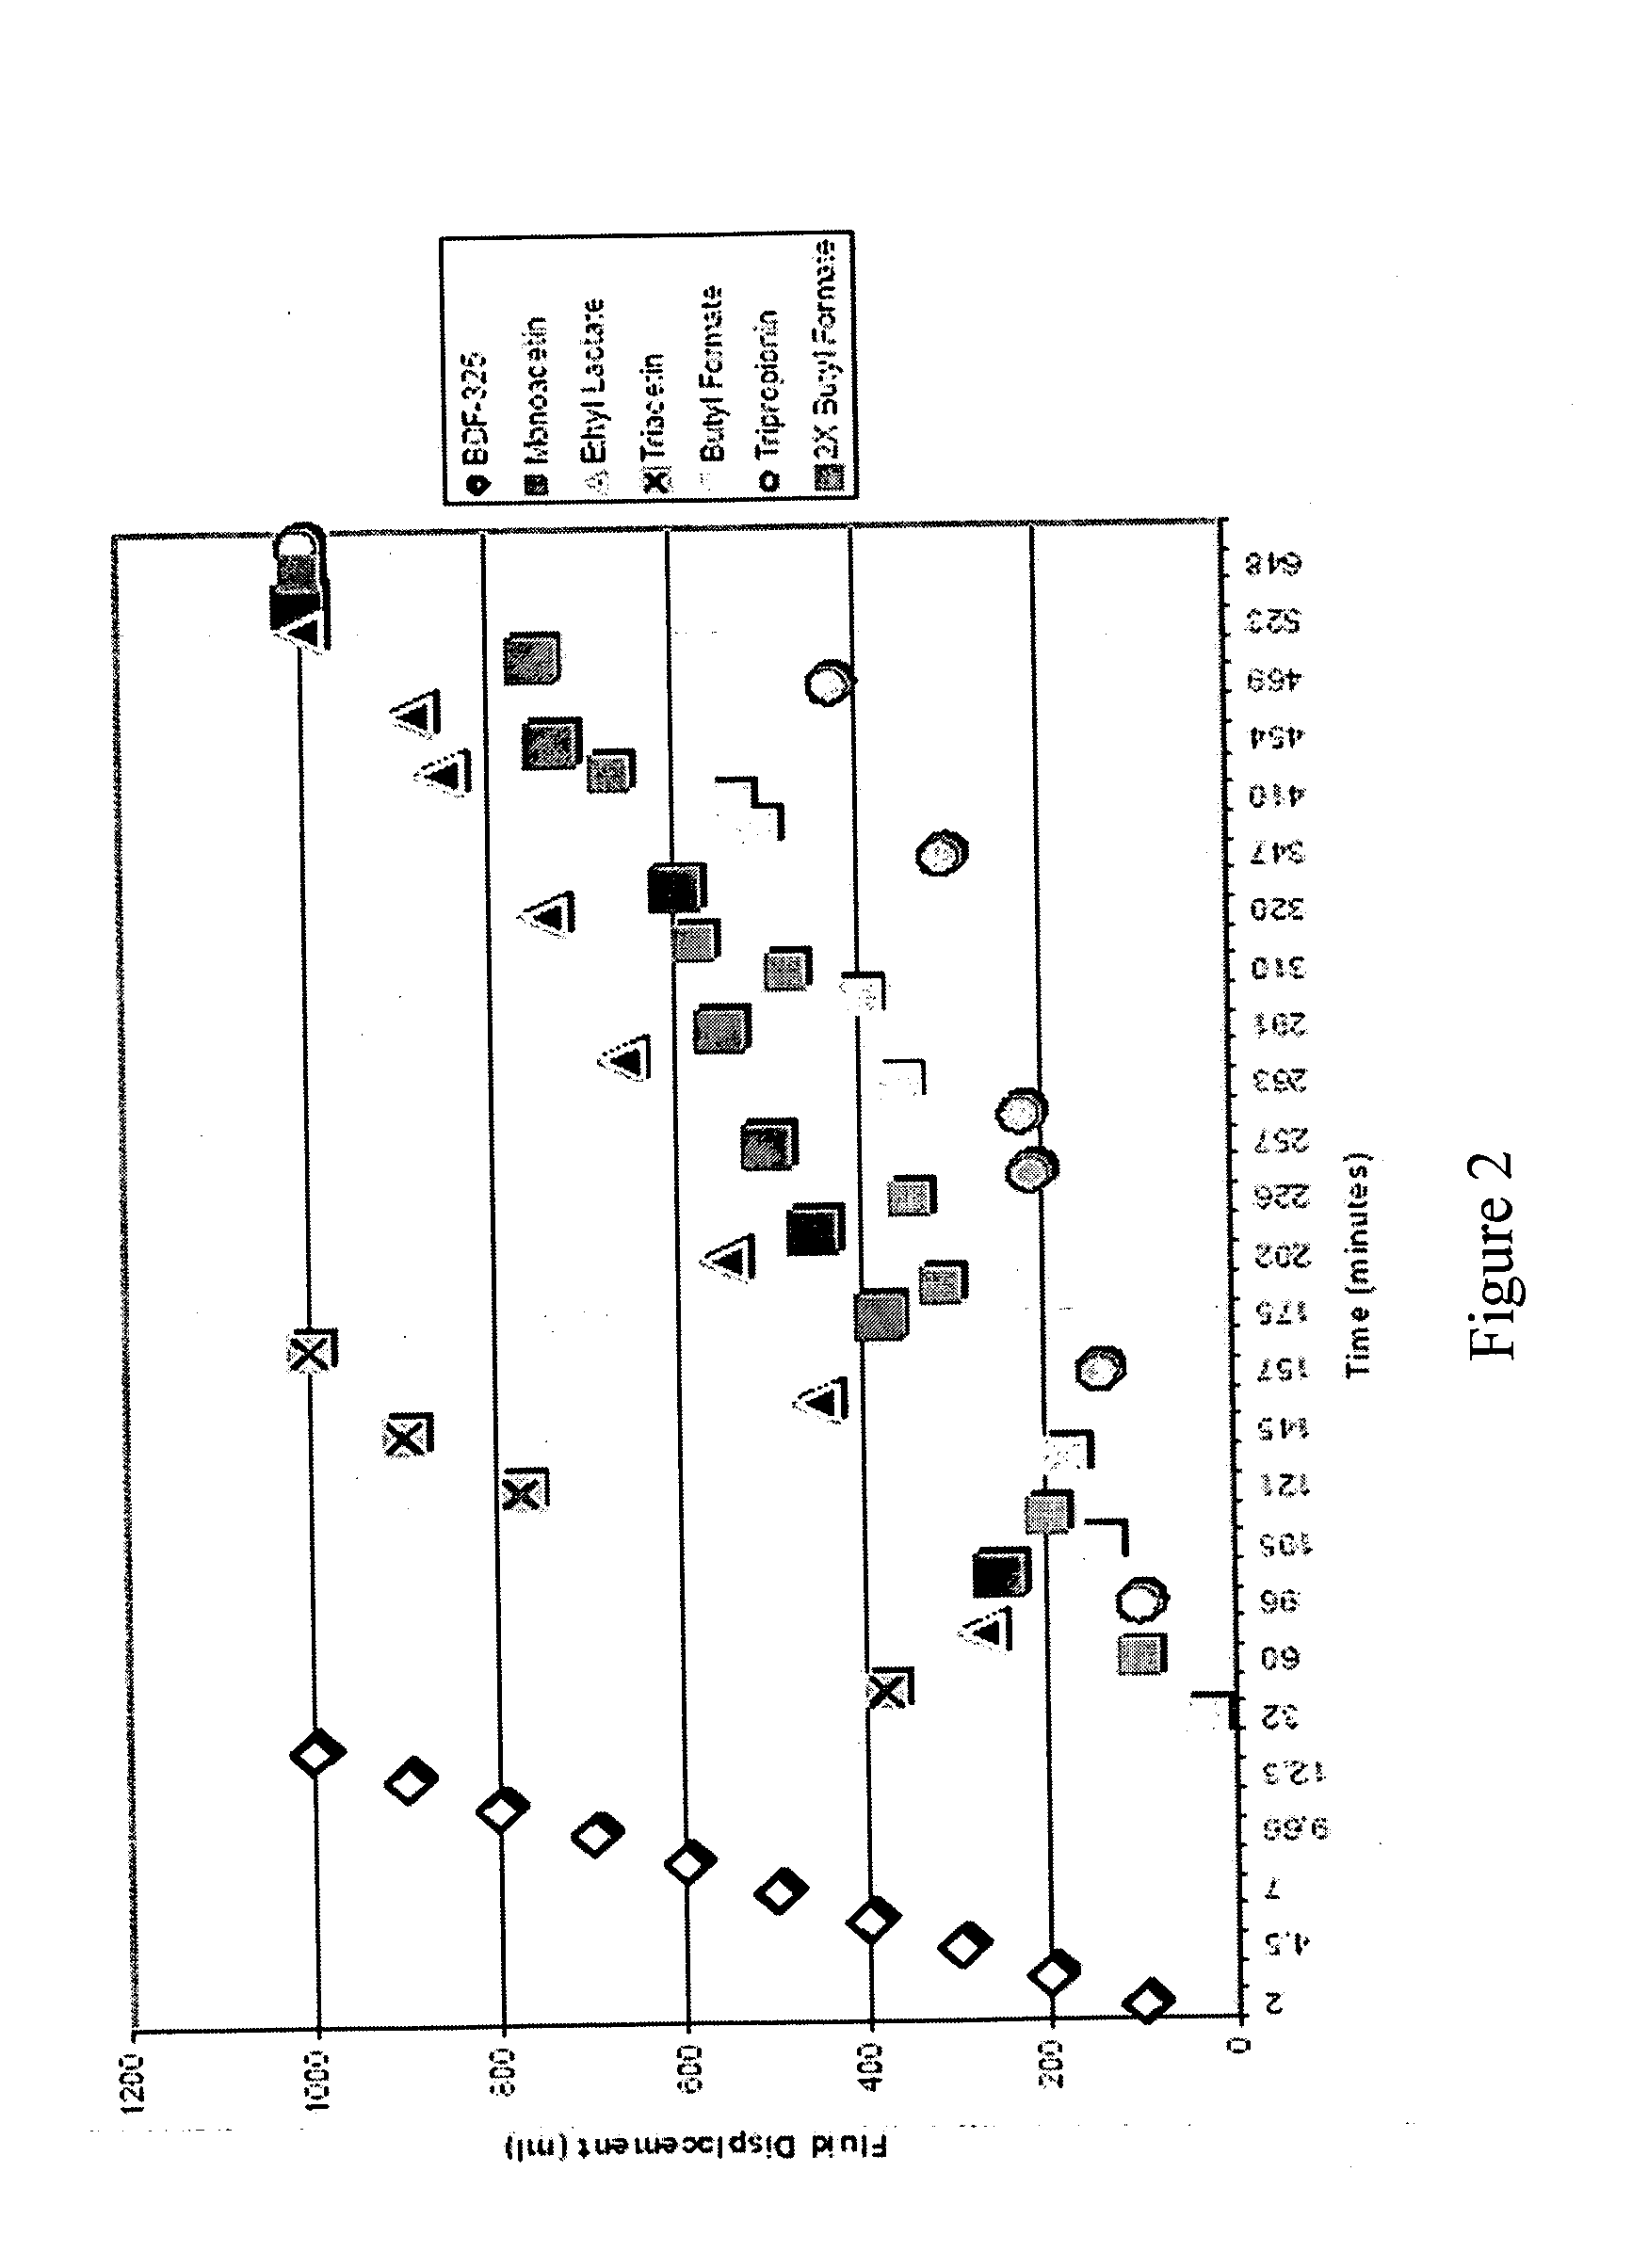 Well treatment compositions for use in acidizing a well